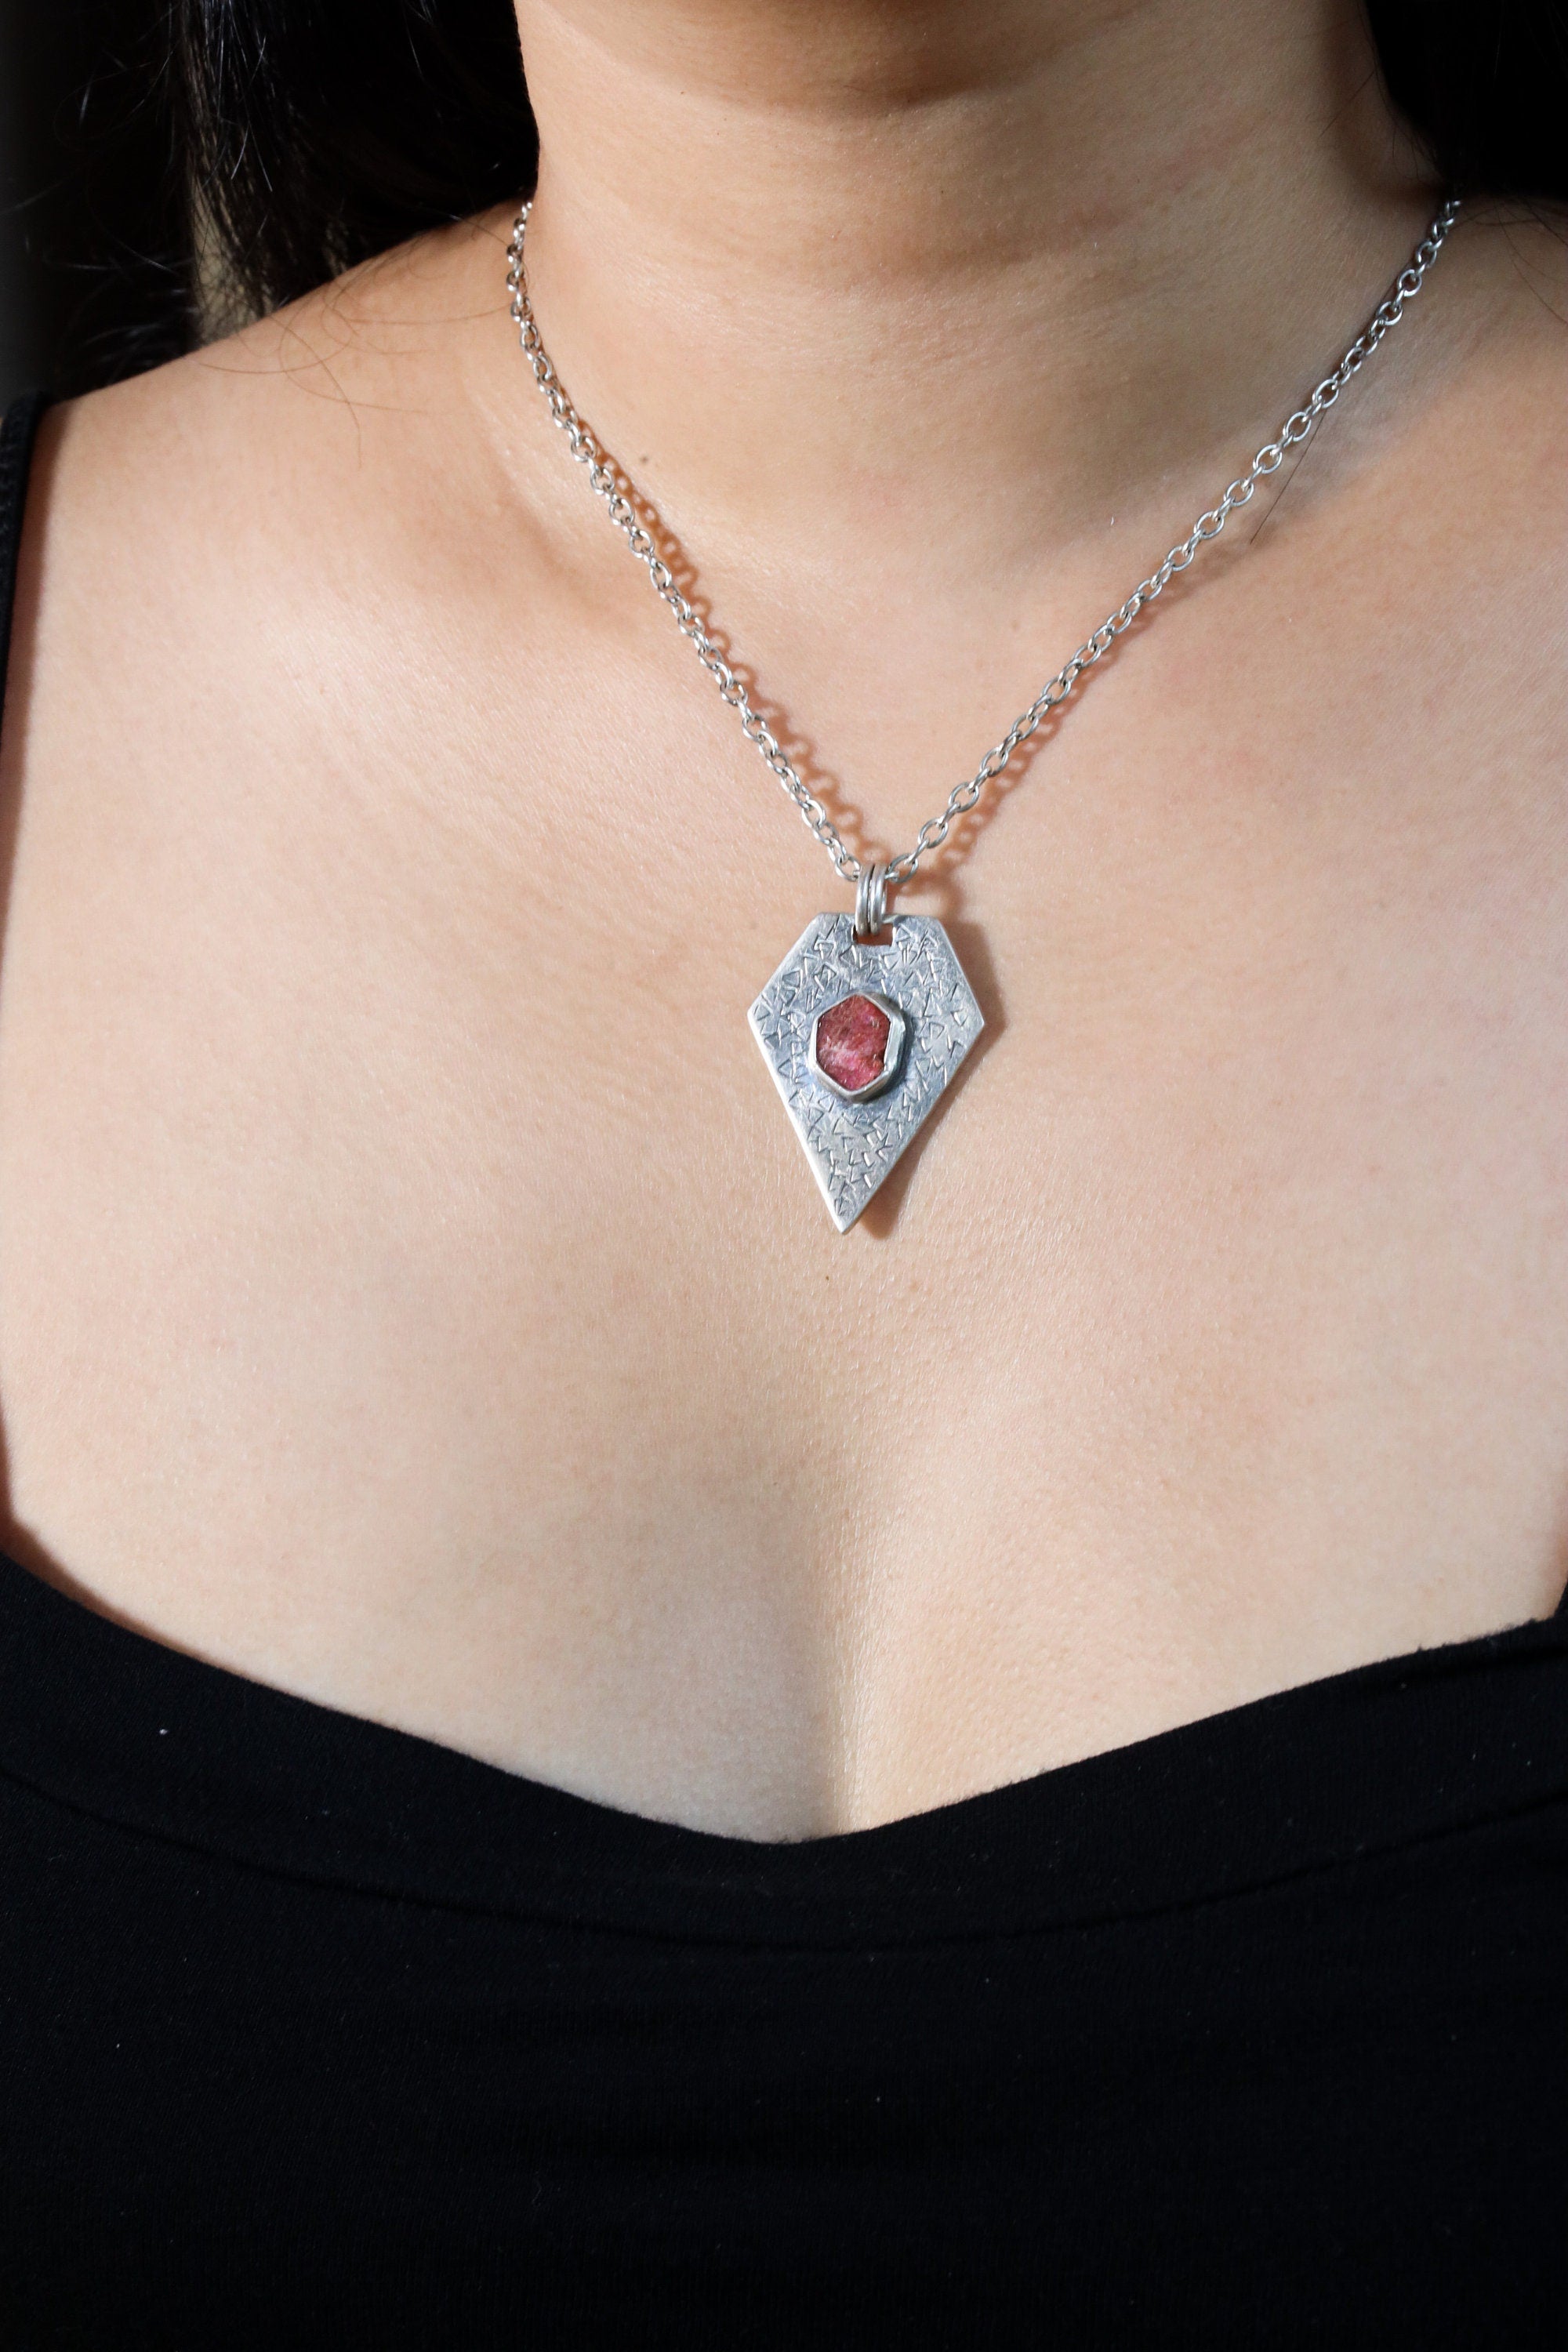 Geometric Gemmy Record Keeper Ruby Muse - Sterling Silver Pendant - Textured & Shiny Finished